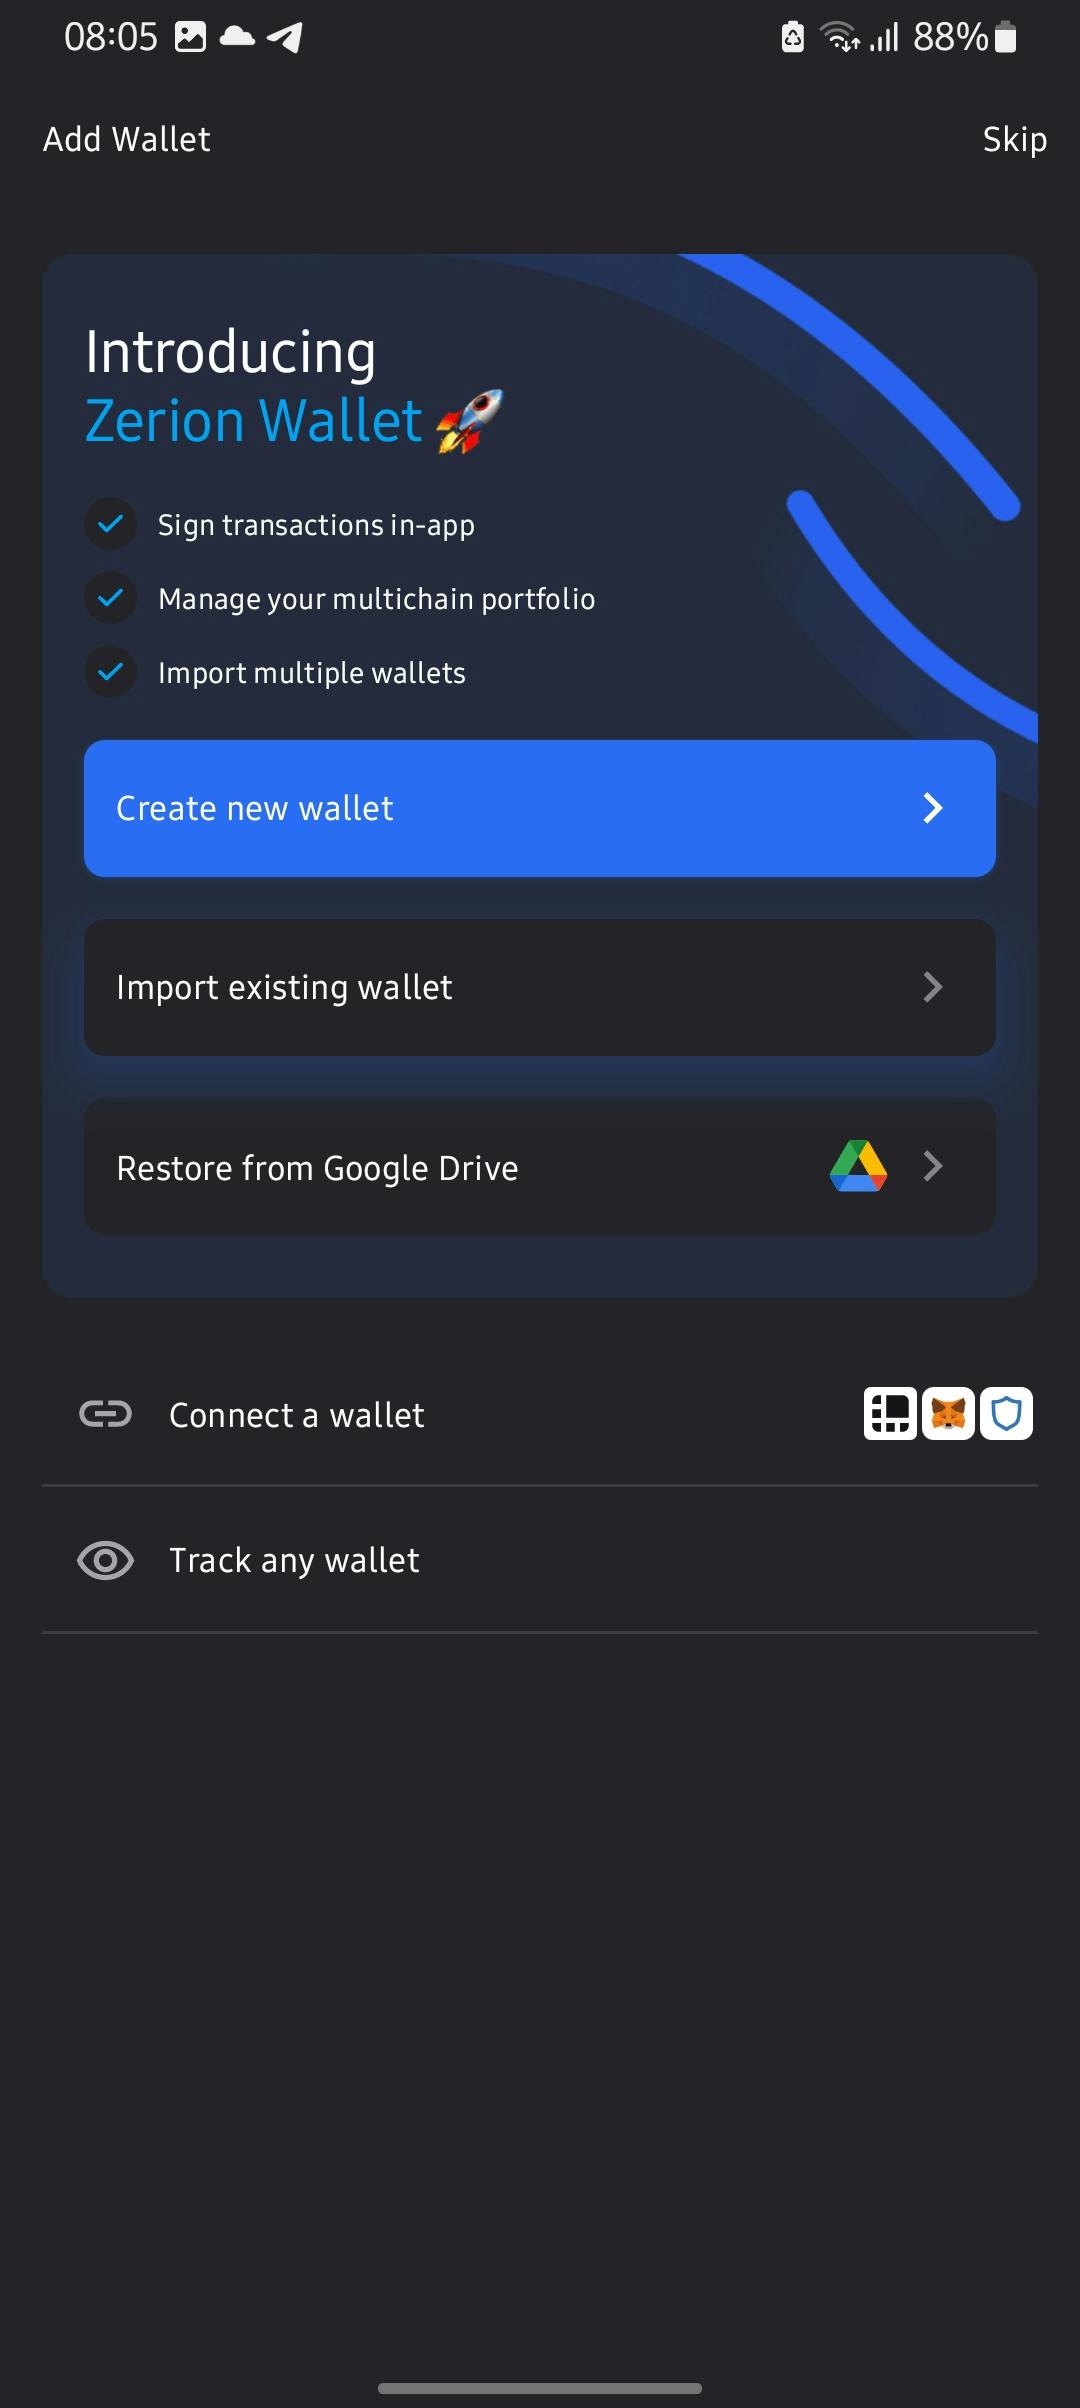 List of options Zerion provides for setting up your wallet